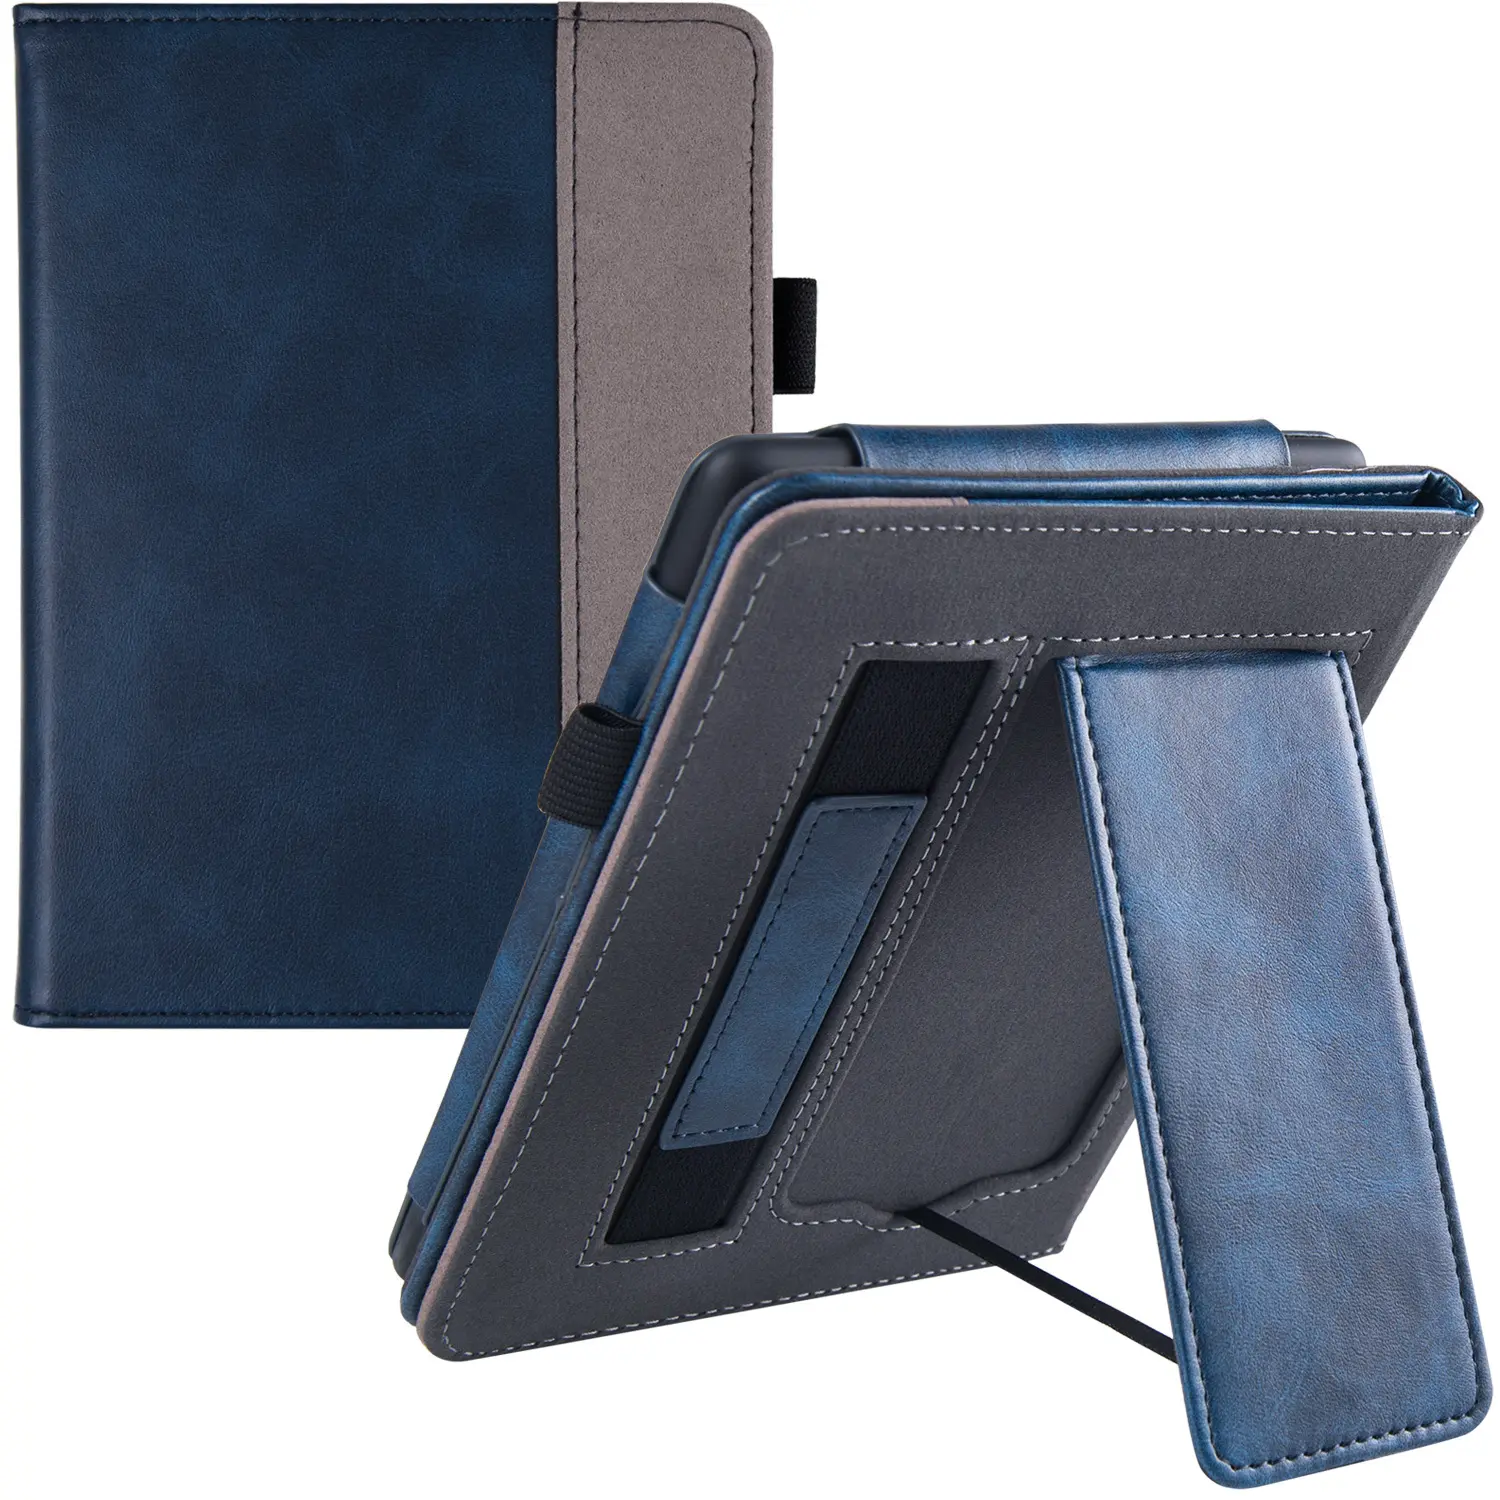 Custom 2021 Tablet Hard 12.9 Cover Cases Luxury Leather Flip 3 10.9 2022 For Ipad Case With Free Shipping 11 Pro